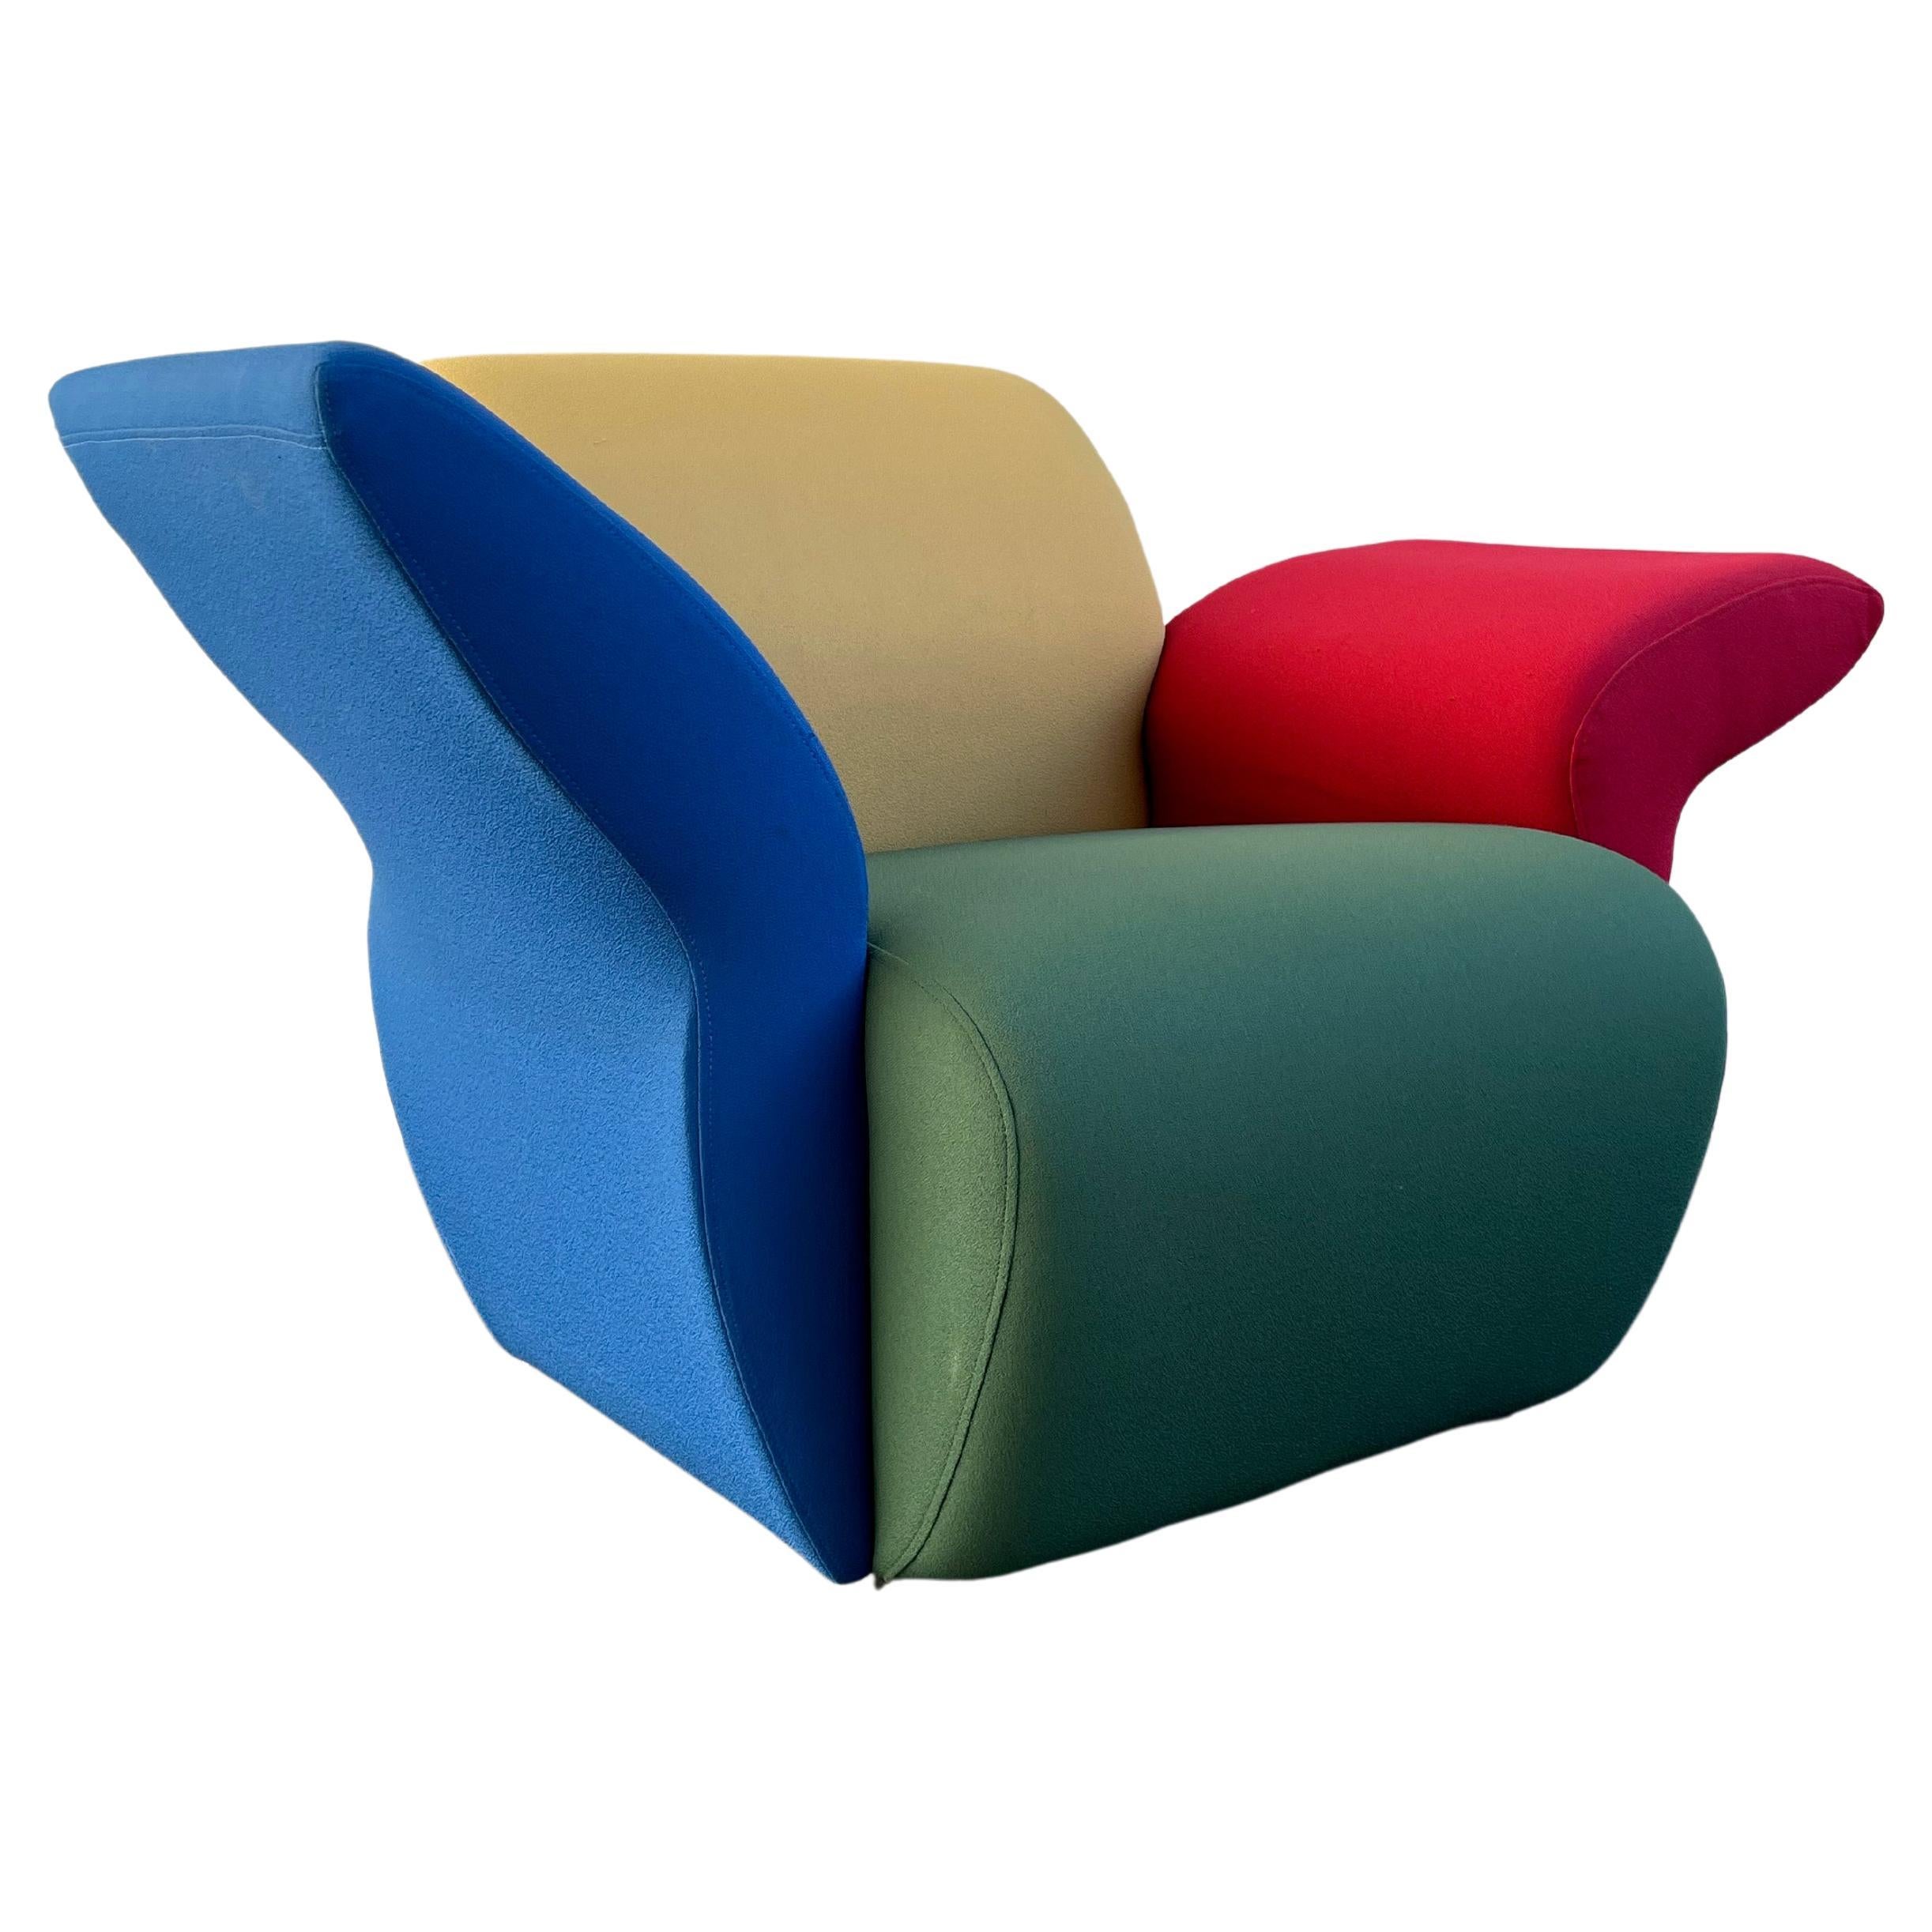 Postmodern Multicolor Lounge Chairs by David Burry, Montreal, 1980s For Sale